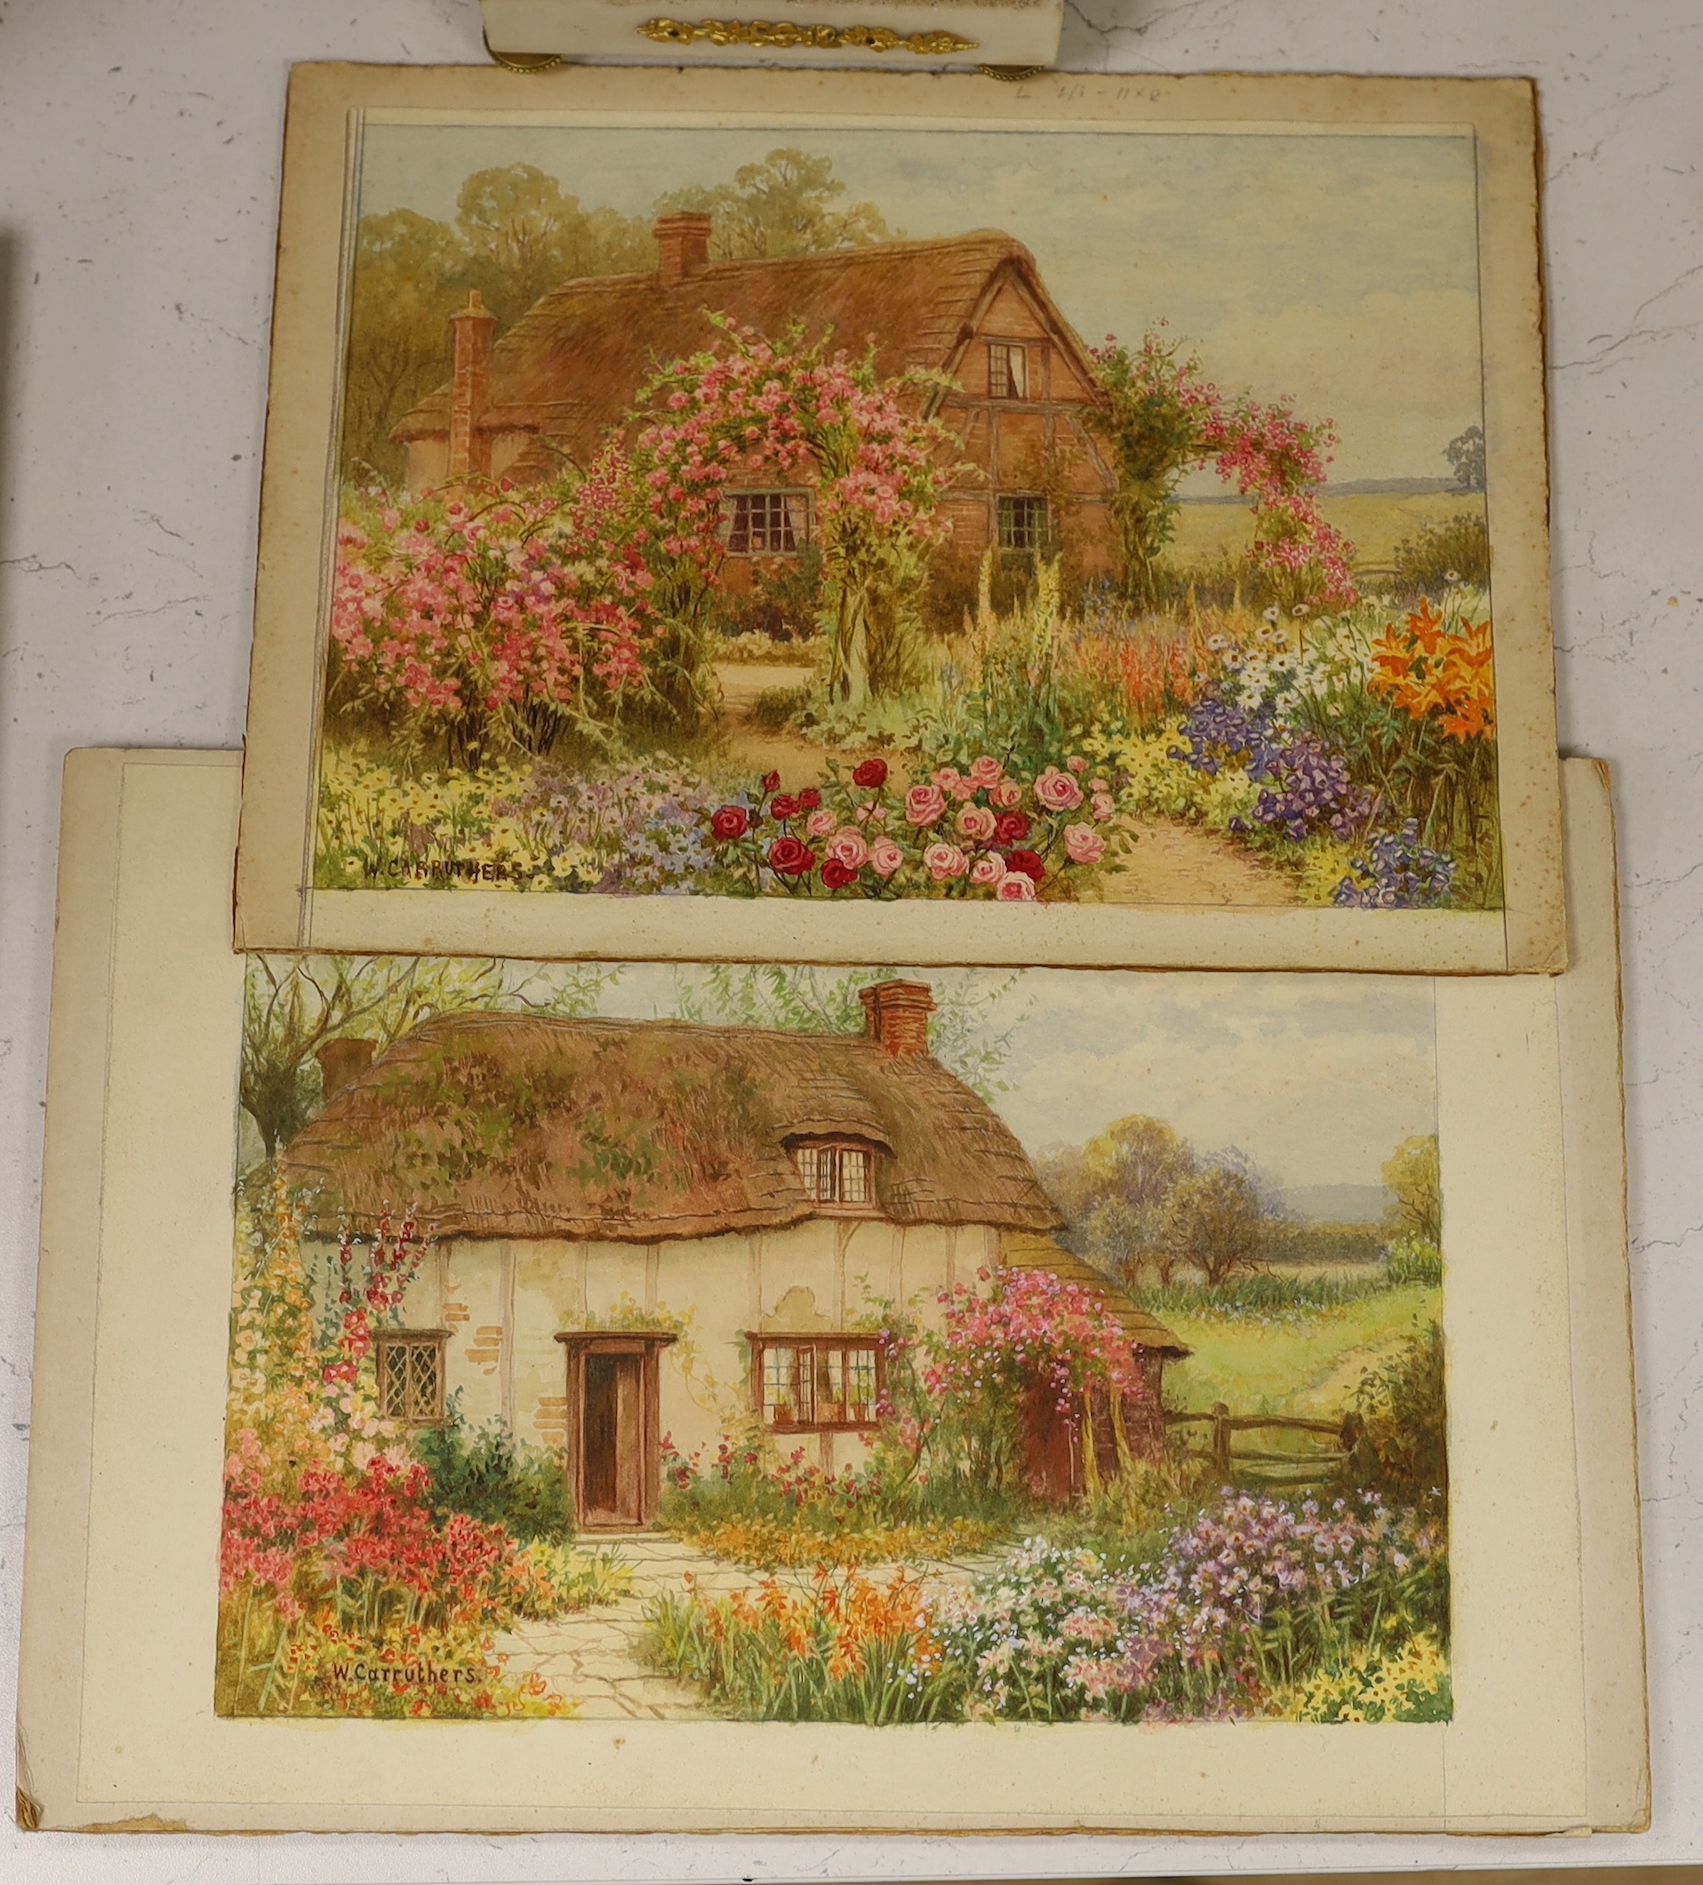 William Affleck (aka, William Carruthers, 1868-1943), two watercolours on card, ‘Old cottage at Ashow, Warwickshire’ and ‘Old cottage at Chalgrove, Oxfordshire’, each signed, largest 22 x 30cm, unframed